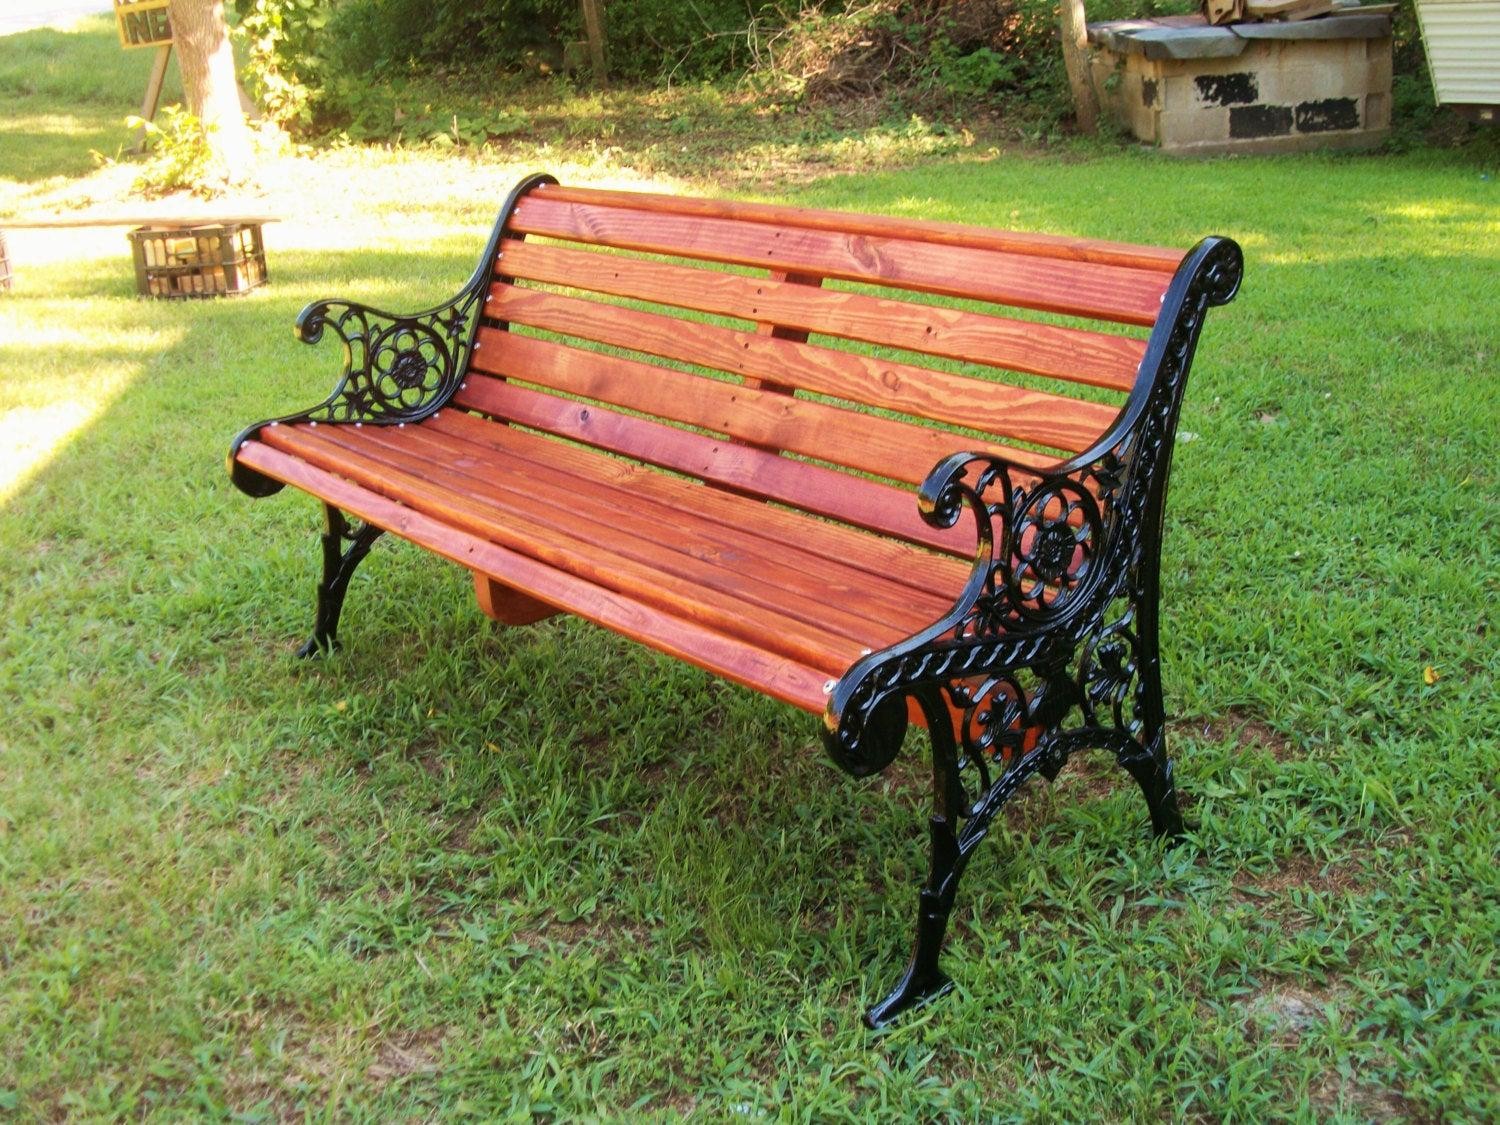 for Porches Cast Iron Frames and Anticorrosive Solid Wood Decorative Seats Outdoor Park Benches with Backrests and Armrests Wooden Slatted Garden Terrace Benches Entrance Benches